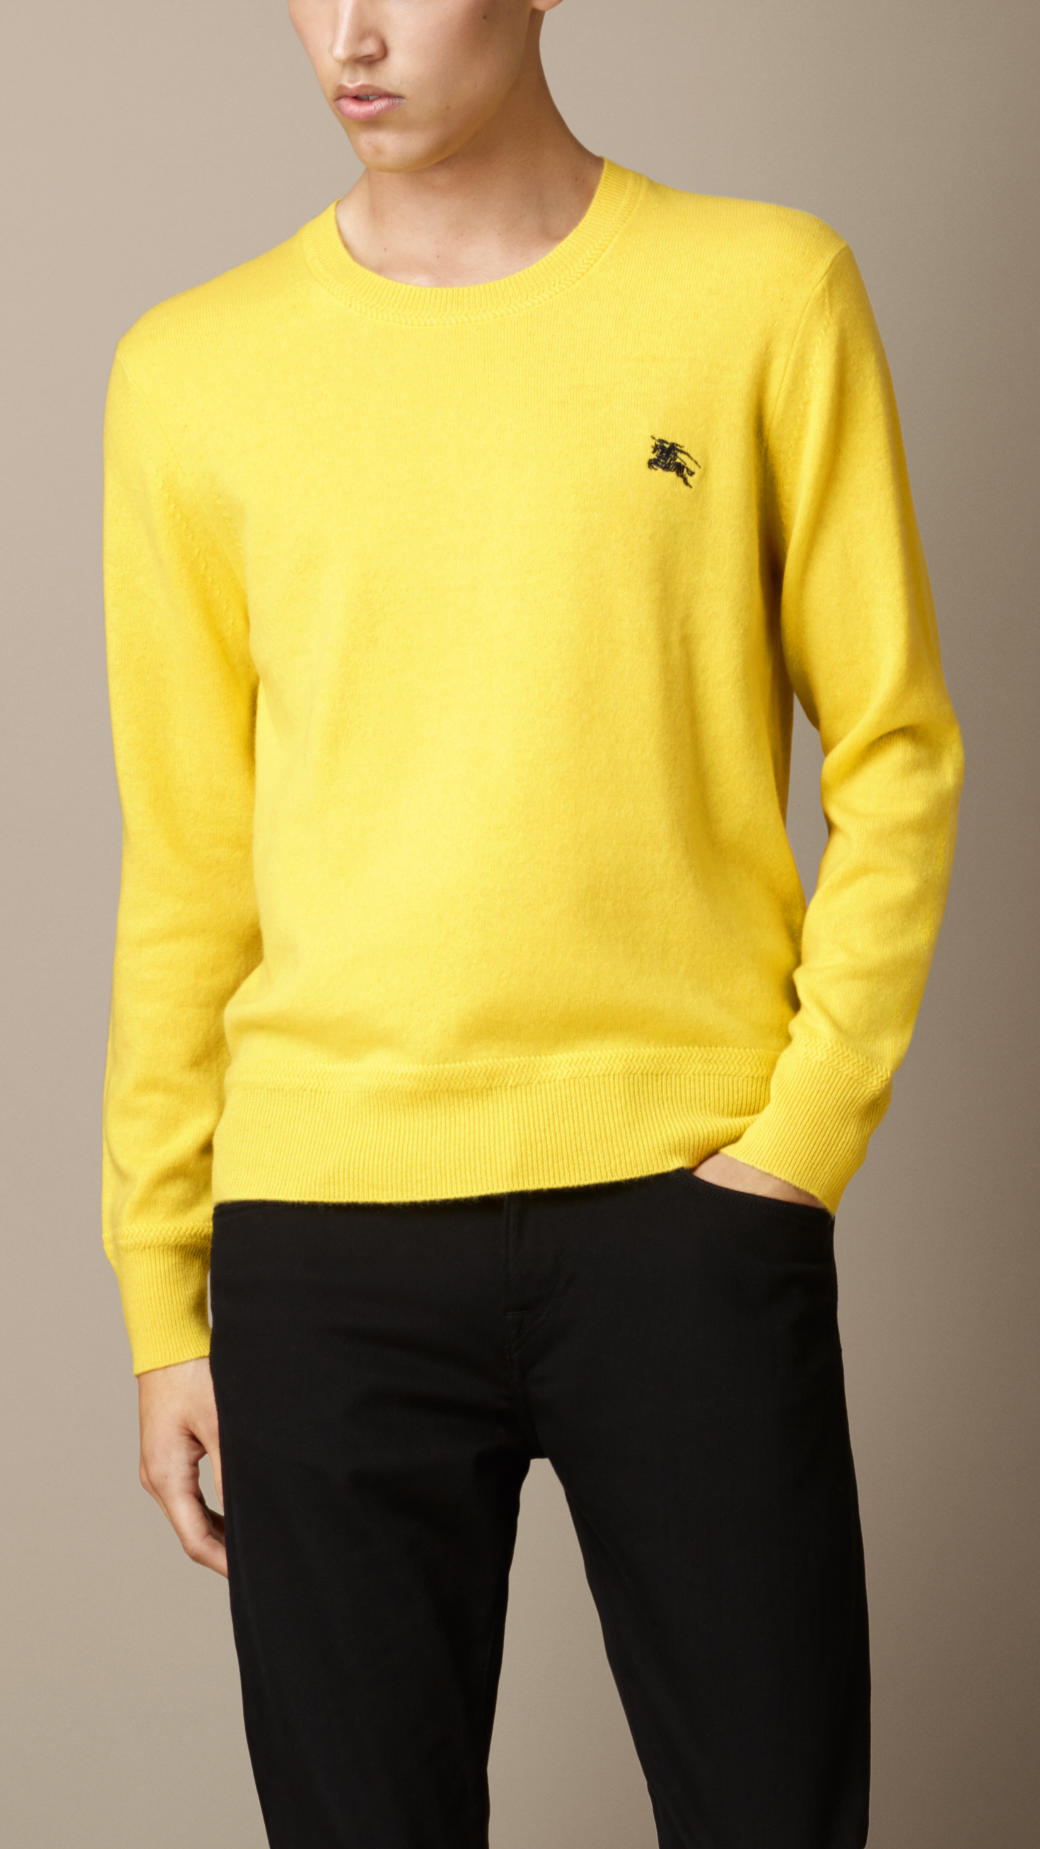 Cashmere Sweater in Yellow for Men - Lyst